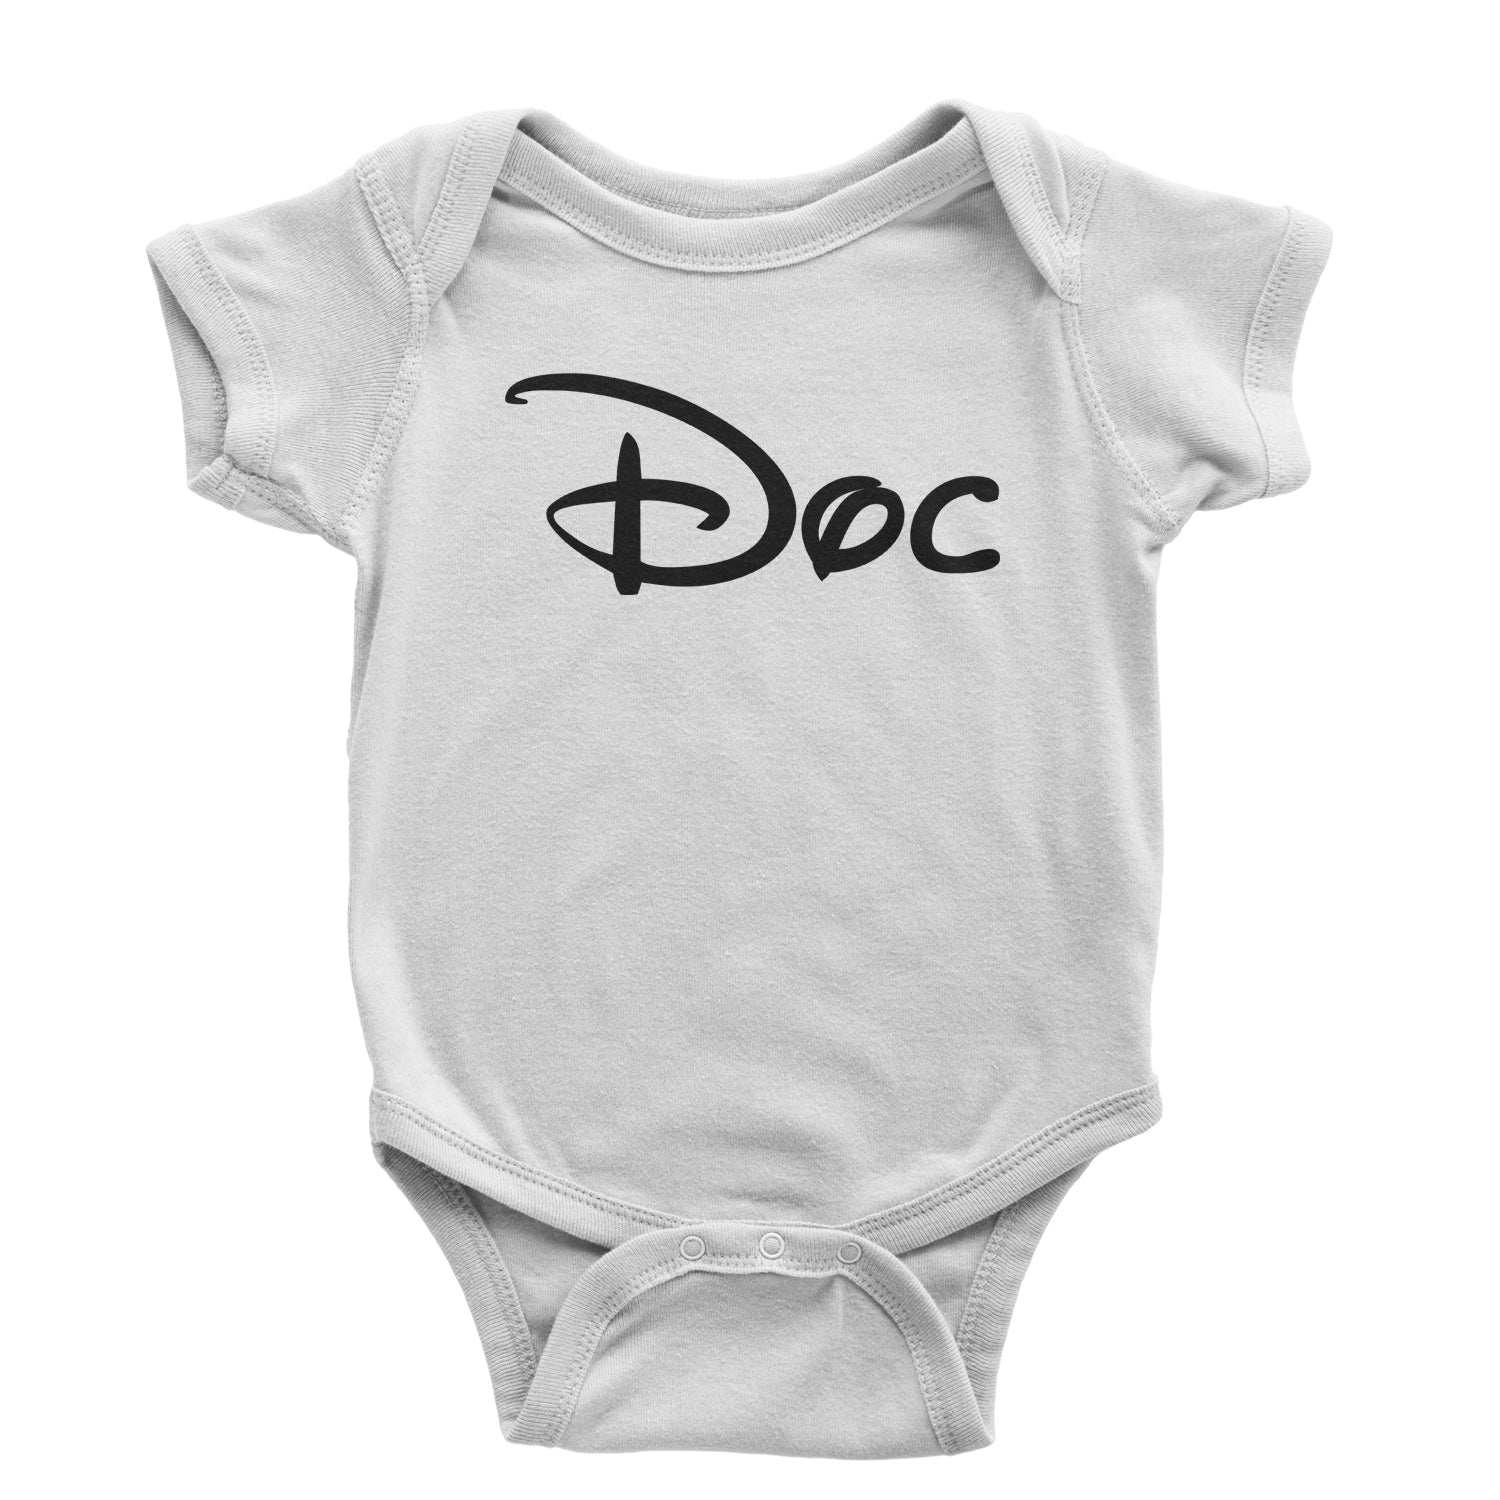 Doc - 7 Dwarfs Costume Infant One-Piece Romper Bodysuit and, costume, dwarfs, group, halloween, matching, seven, snow, the, white by Expression Tees